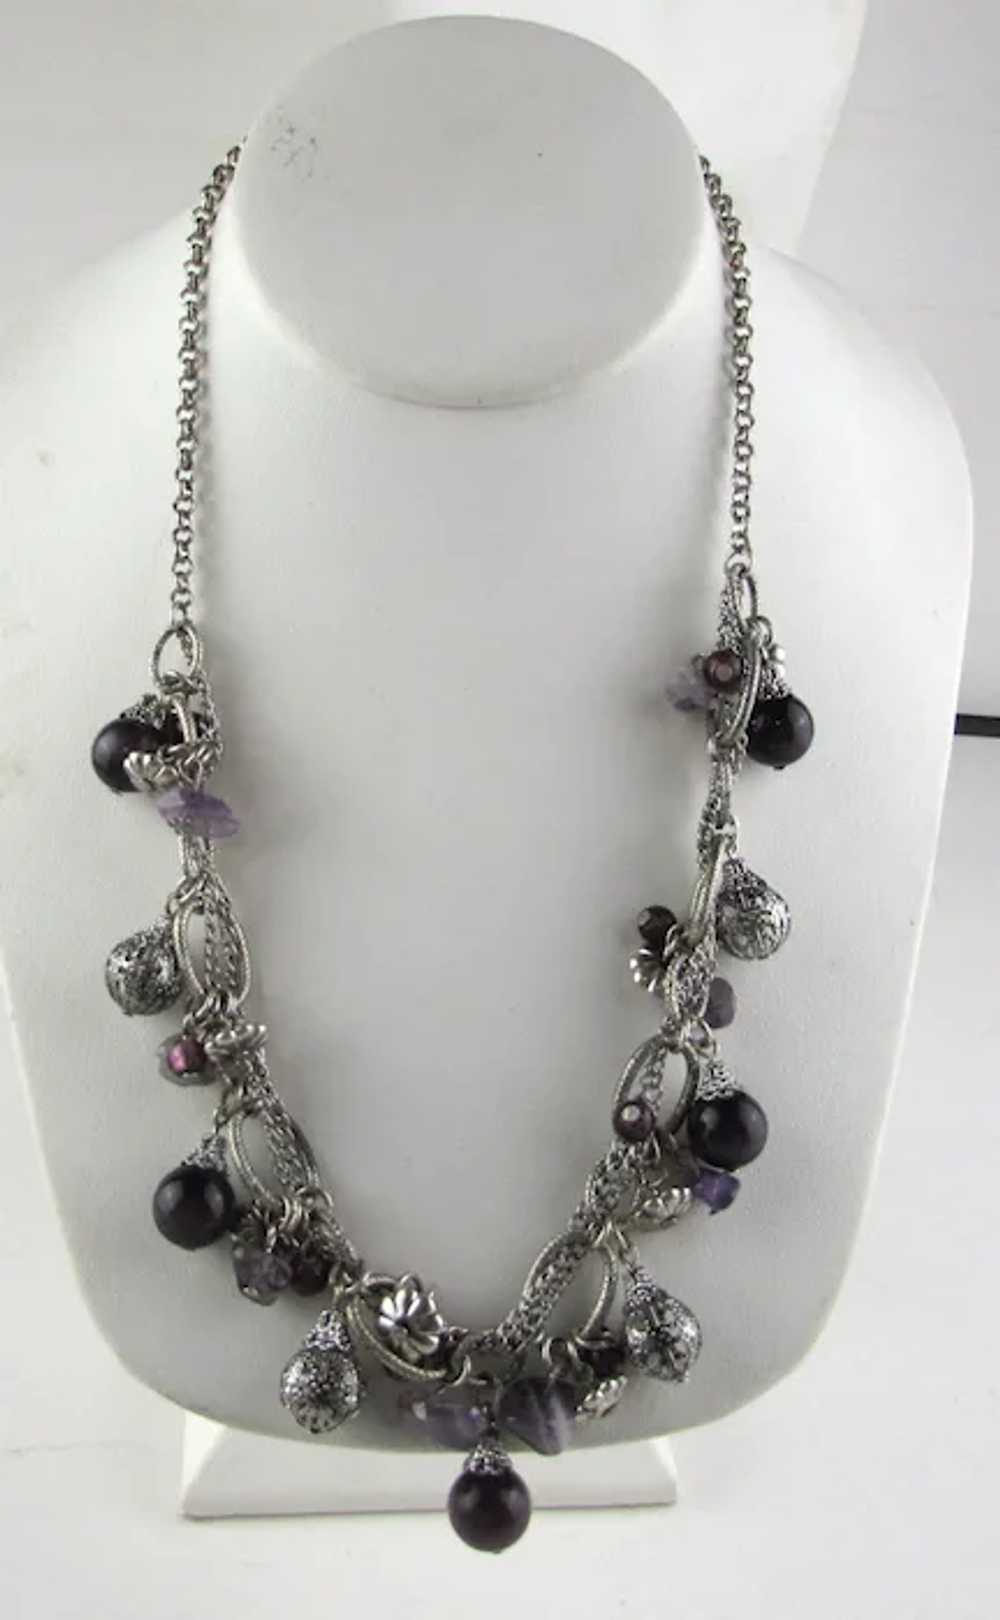 Silver Tone Necklace With Purple Art Glass Baubles - image 4